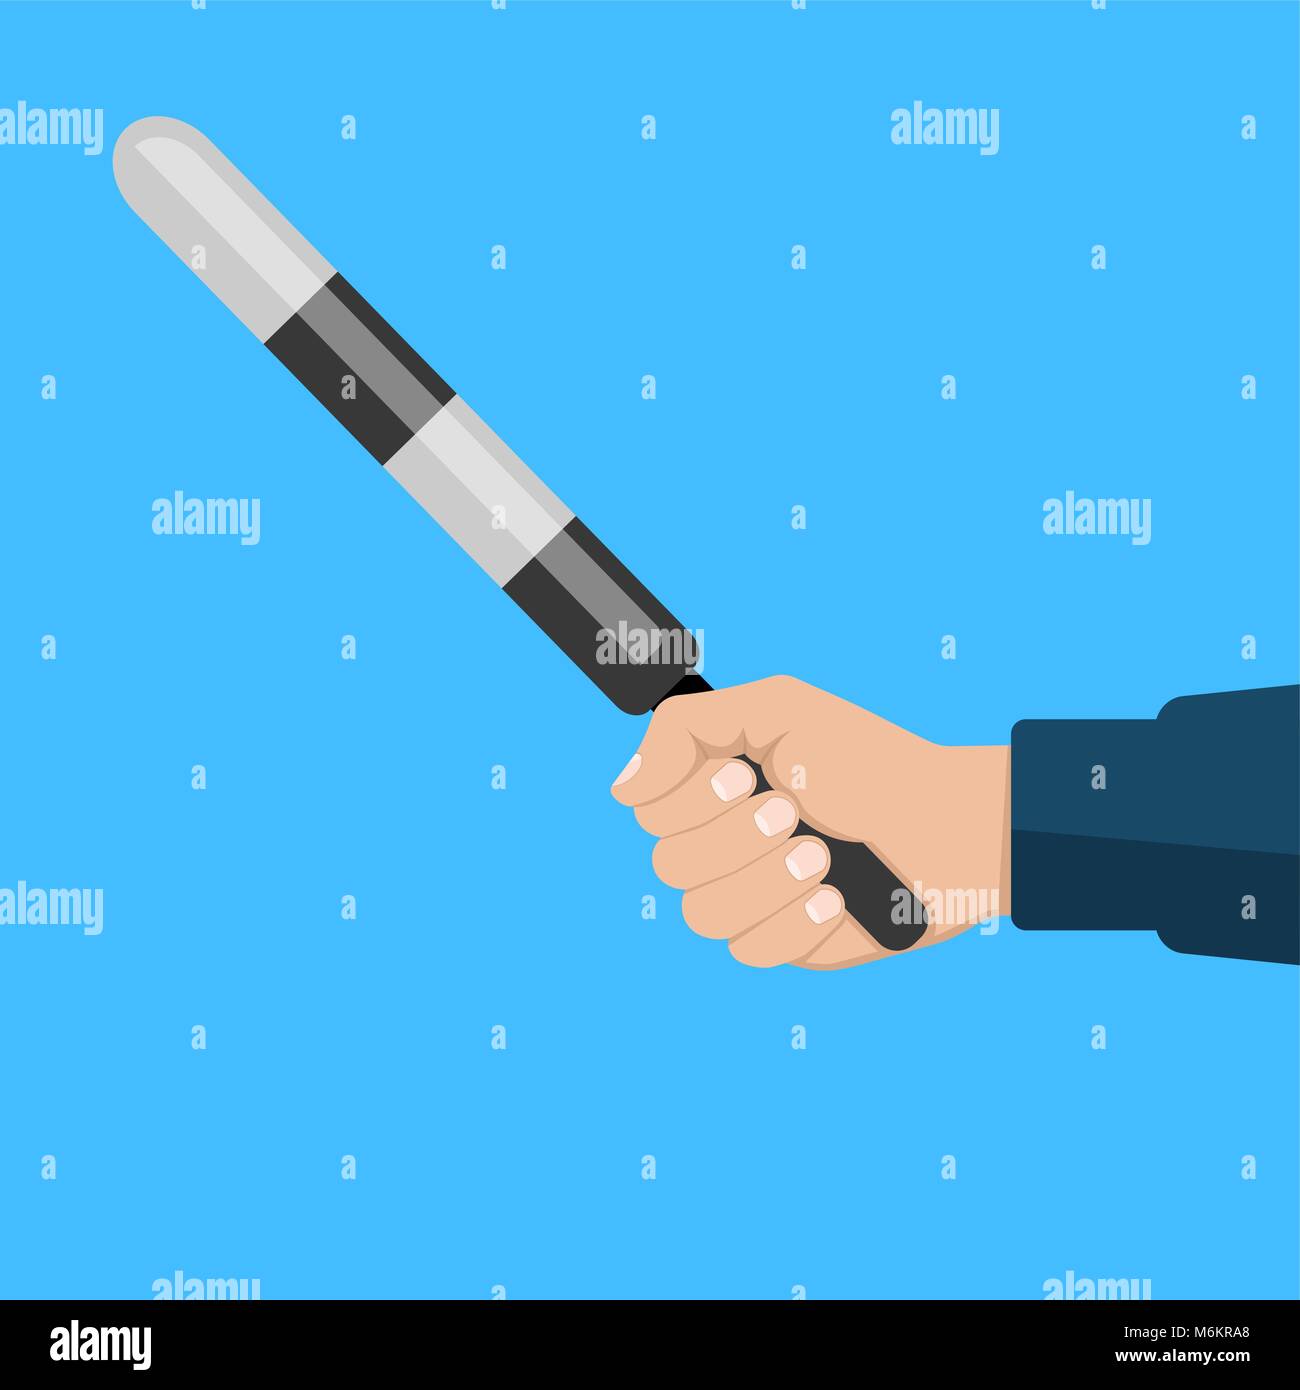 The police officer's hand holding a striped staff. Vector illustration. Stock Vector